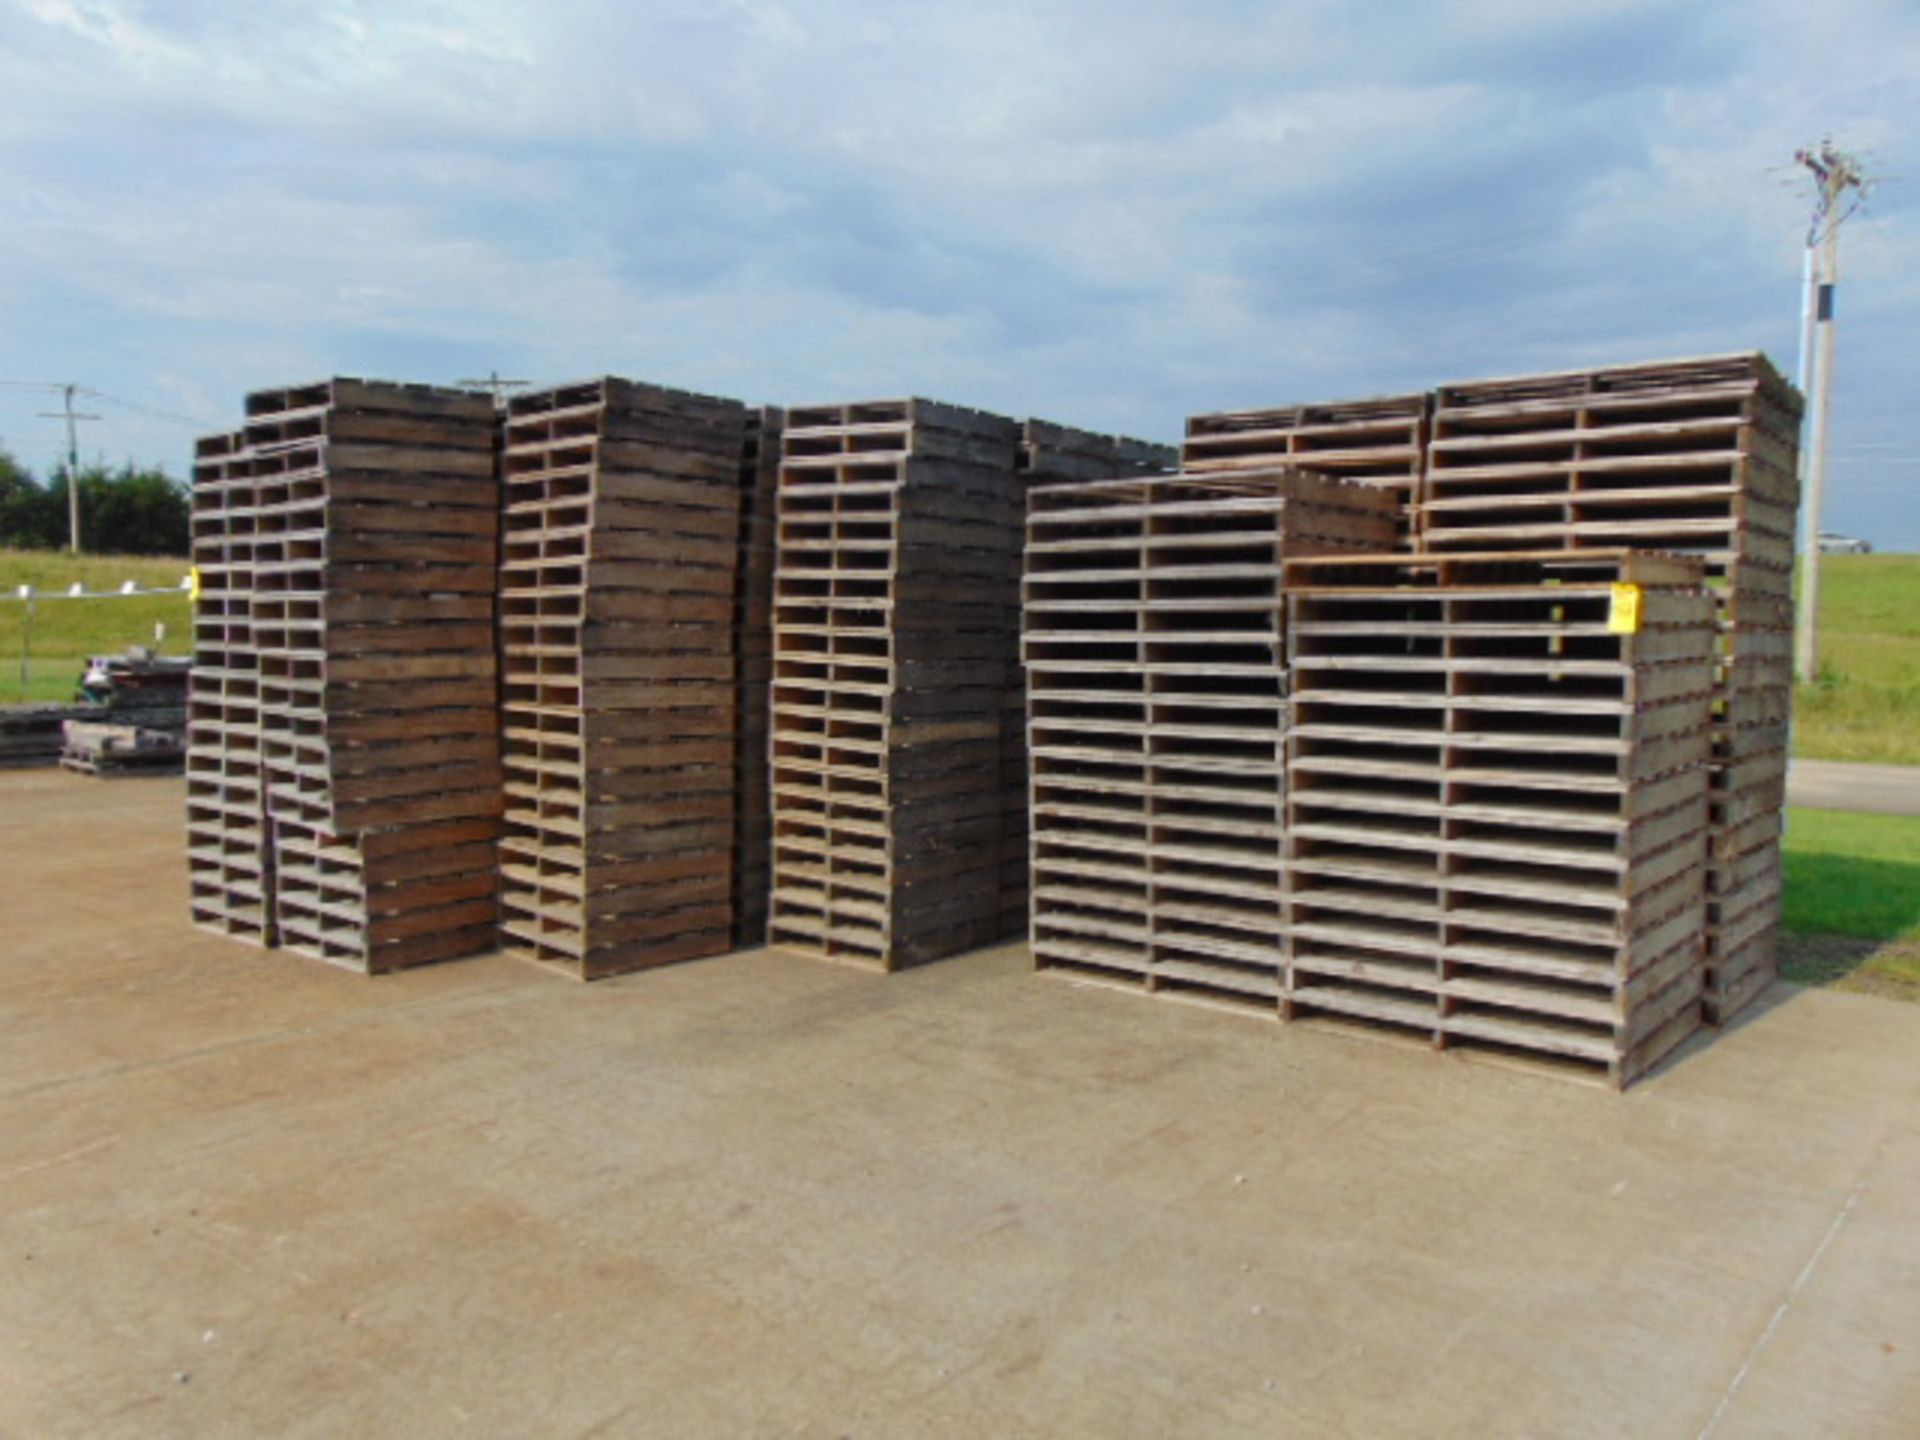 LOT OF PALLETS, assorted (in yard) (Located at: 401 Stephen Taylor Blvd. McAlester, OK 74501) - Image 2 of 2